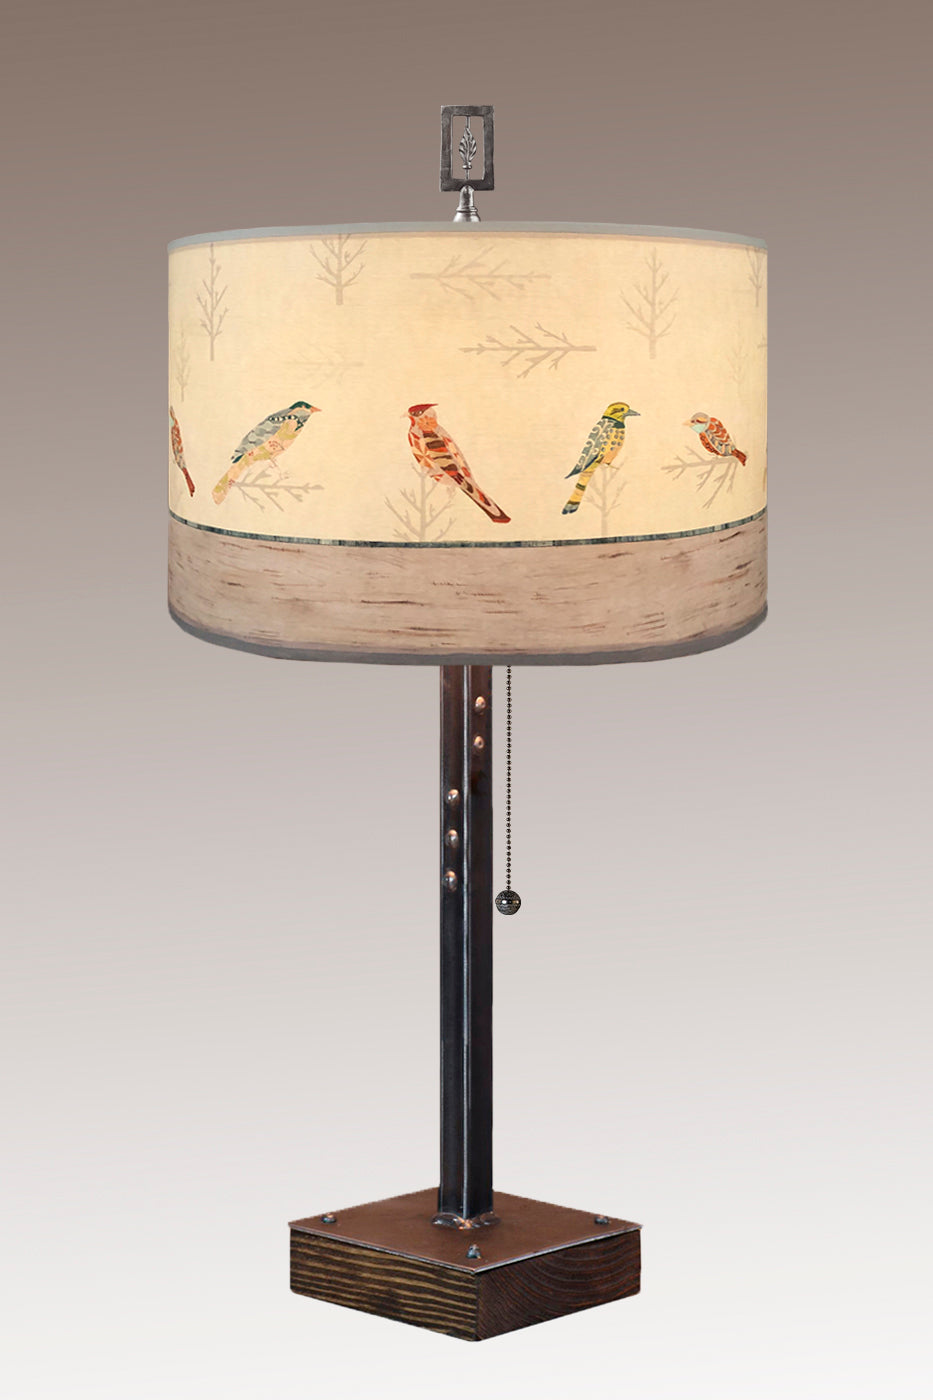 Janna Ugone &amp; Co Table Lamps Steel Table Lamp on Wood with Large Drum Shade in Bird Friends